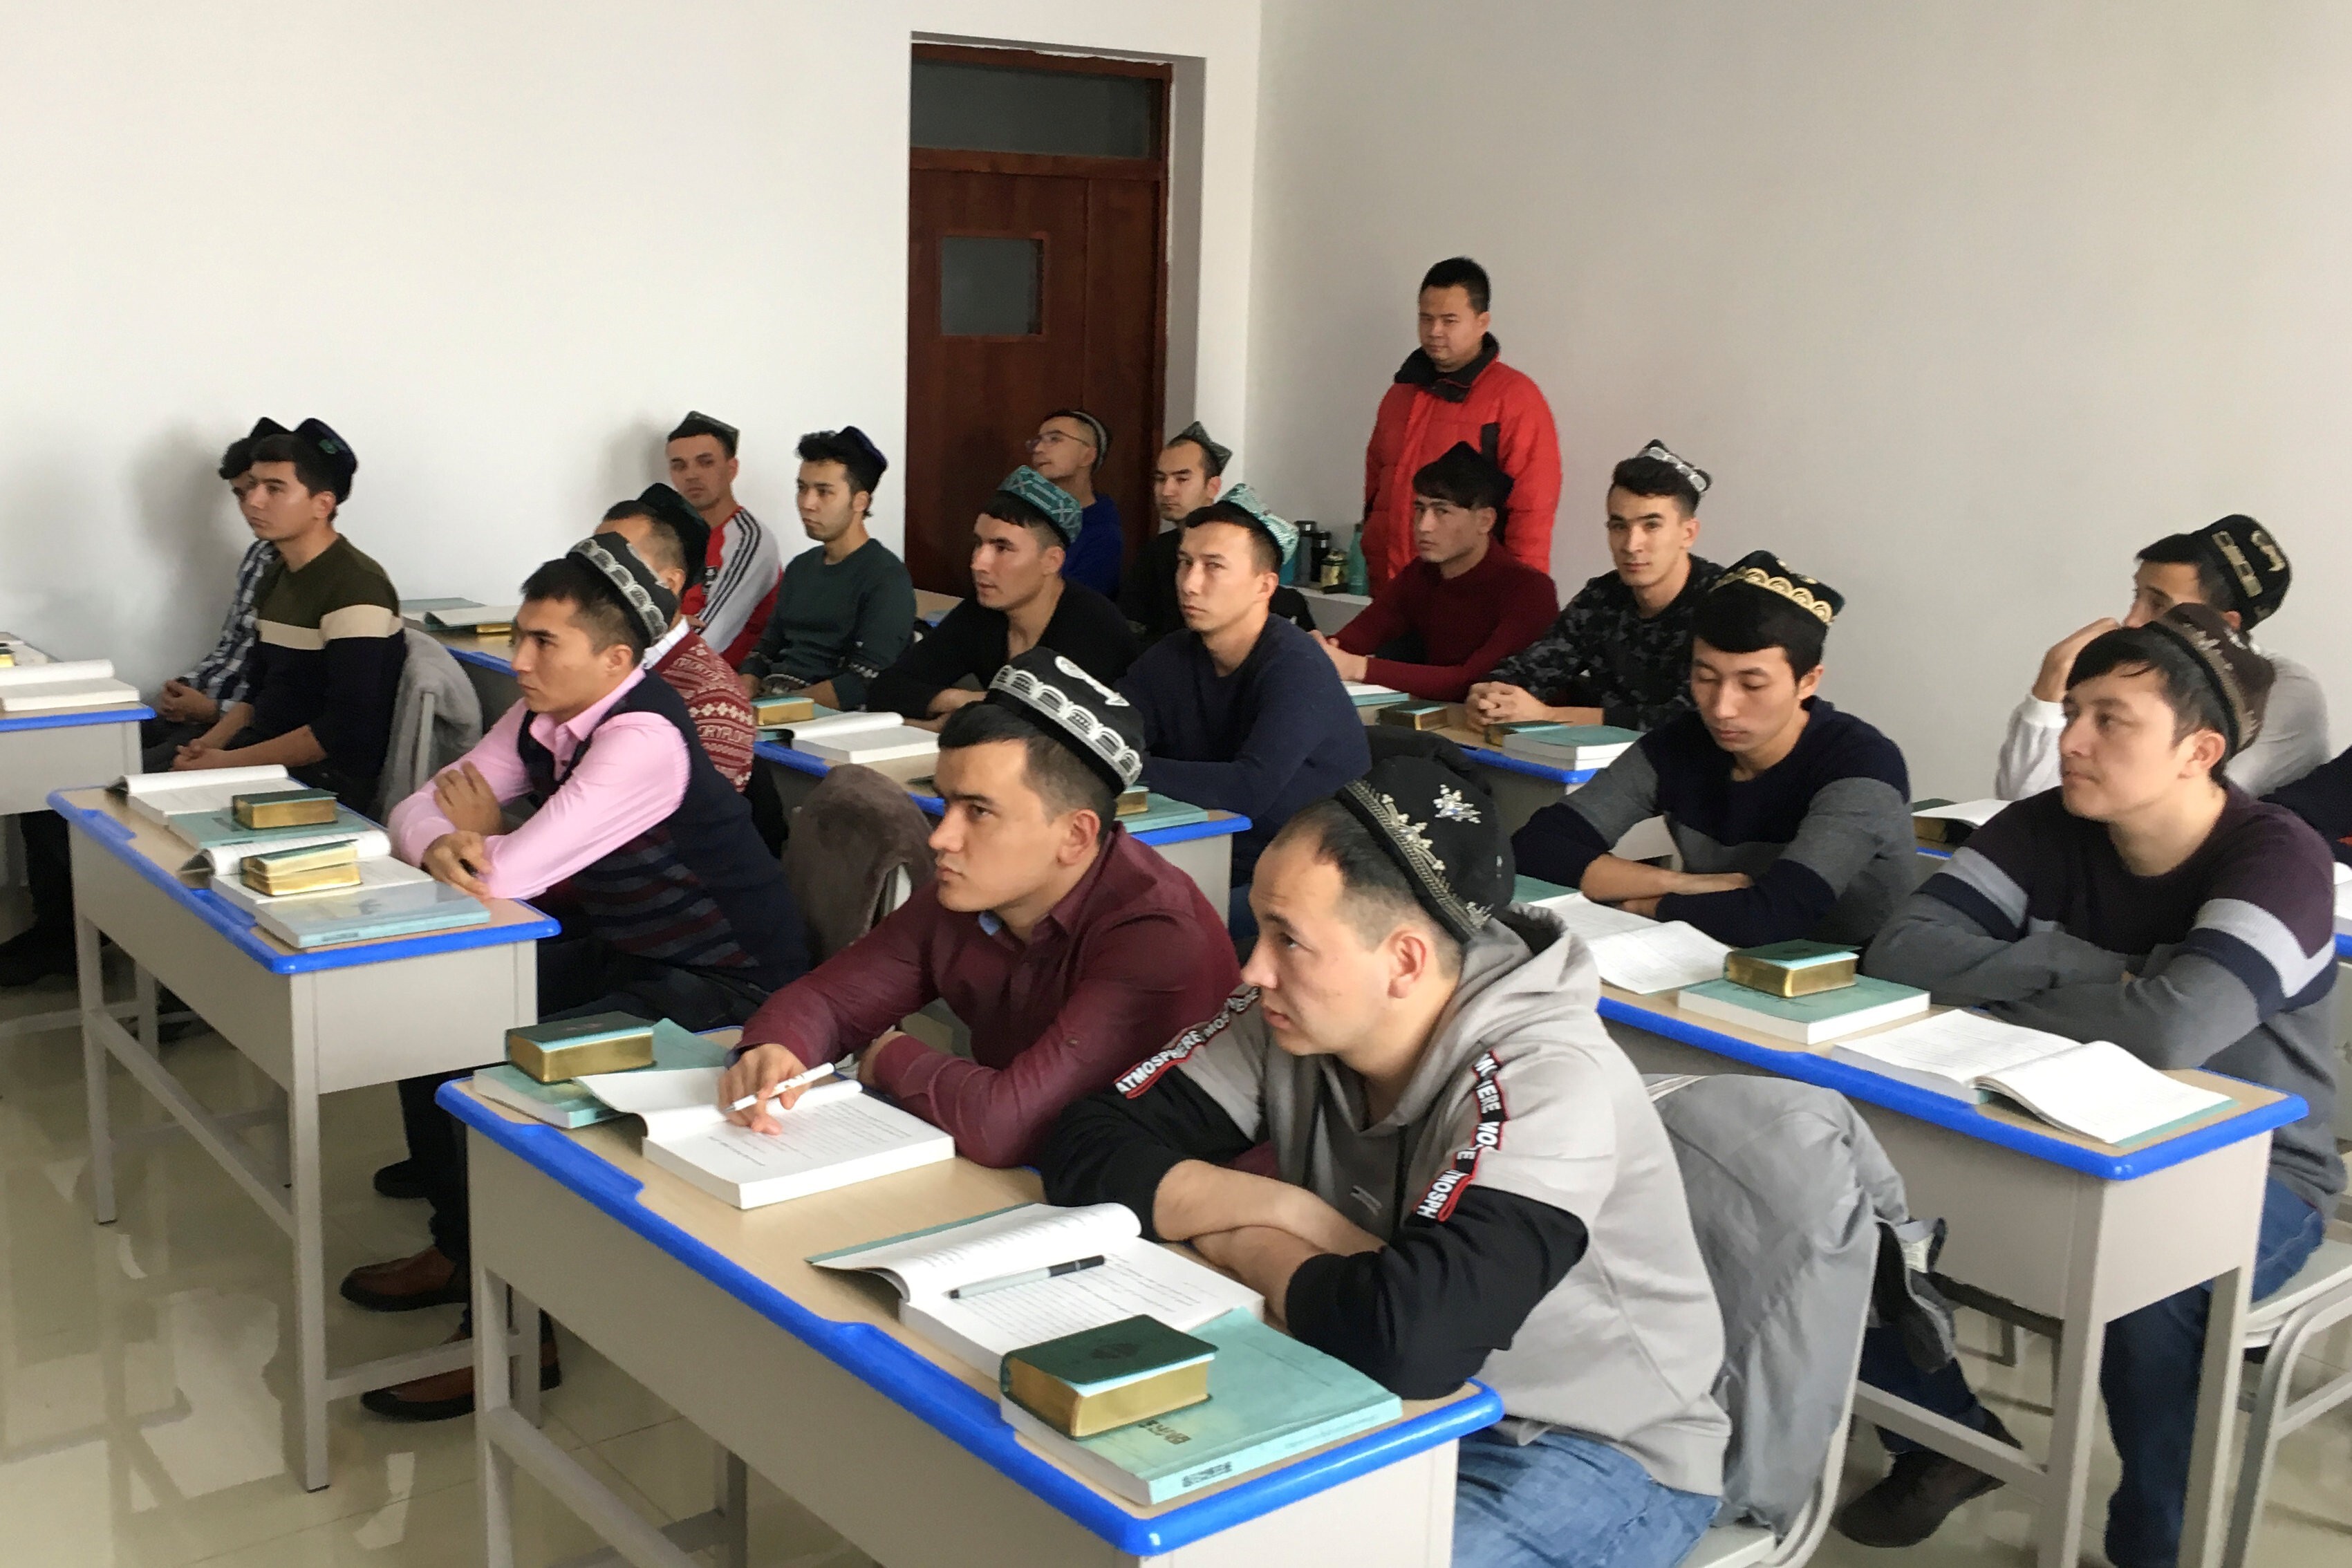 Islamic studies students attend a class at the Xinjiang Islamic Institute during a government-organised trip in Urumqi, Xinjiang Uygur autonomous region, China. Photo: Reuters